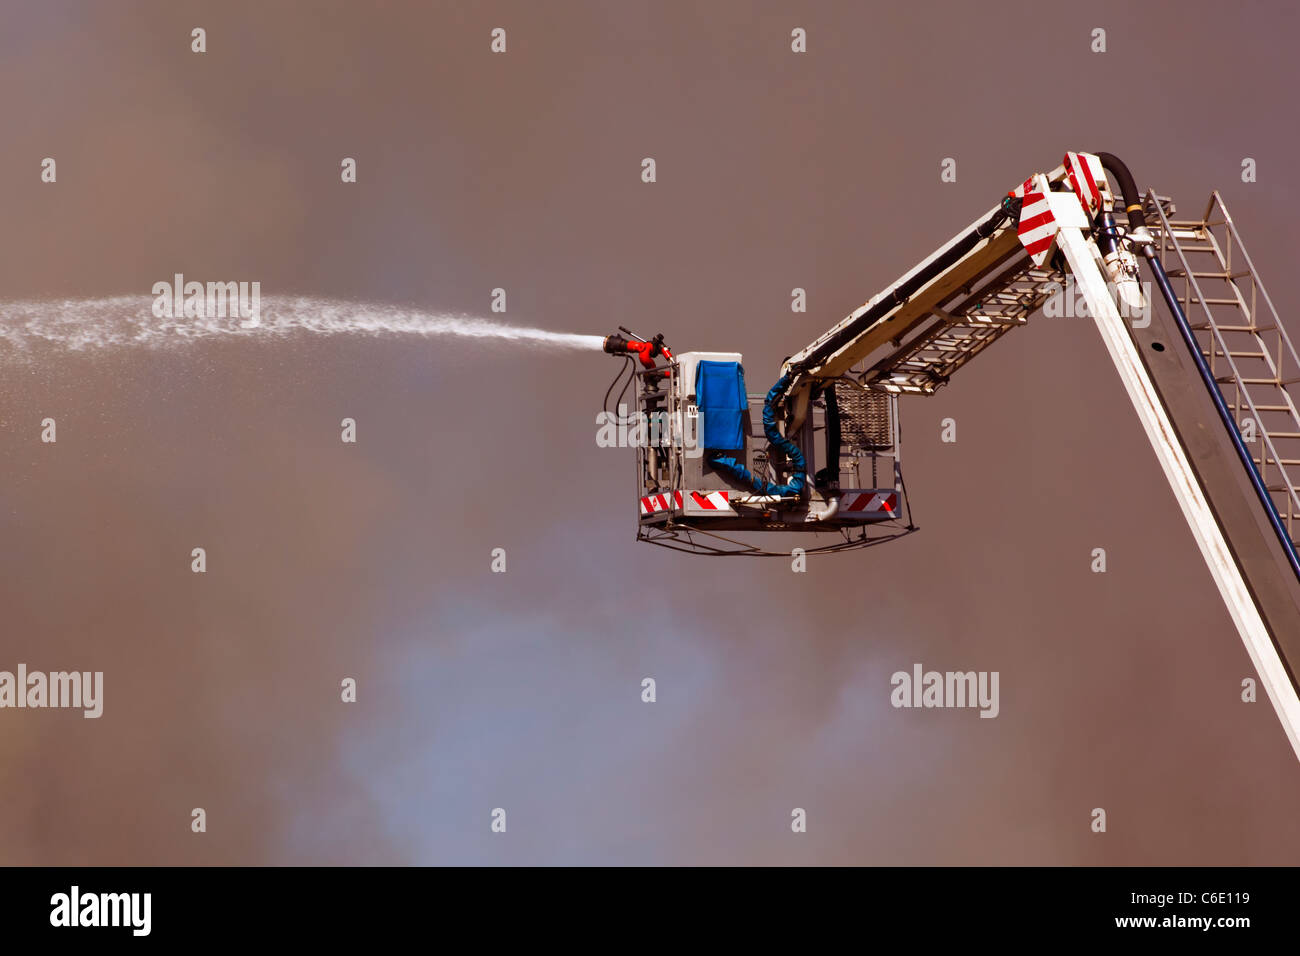 Fighting fire with remote controlled hose on ladder. Stock Photo